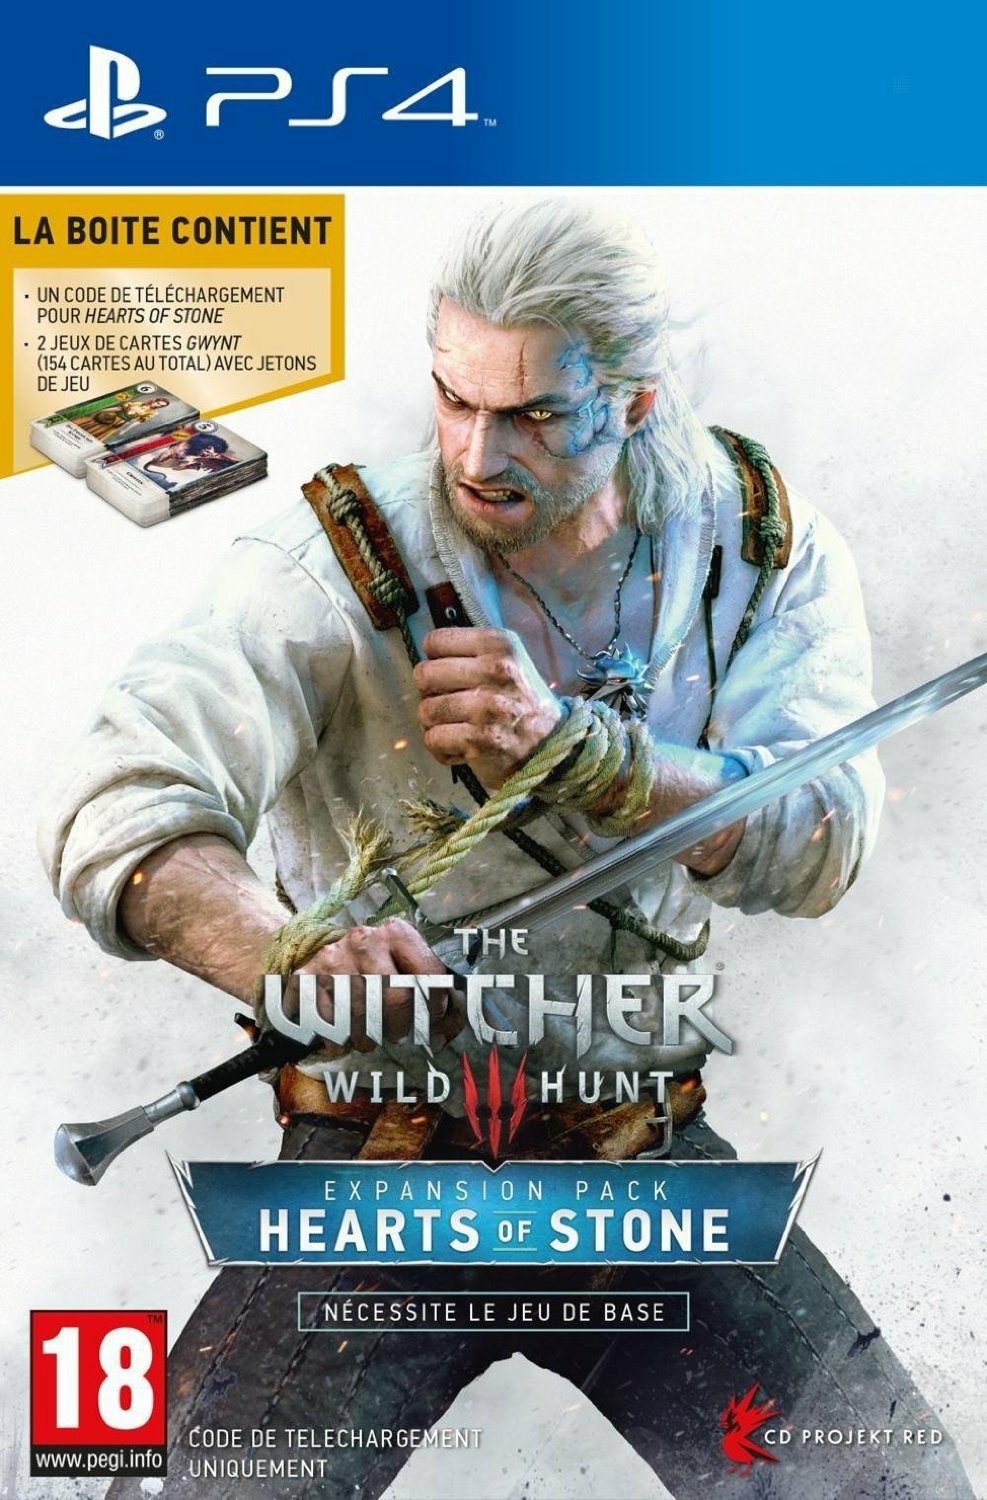 The Witcher 1 Ps3 pas cher - Achat neuf et occasion